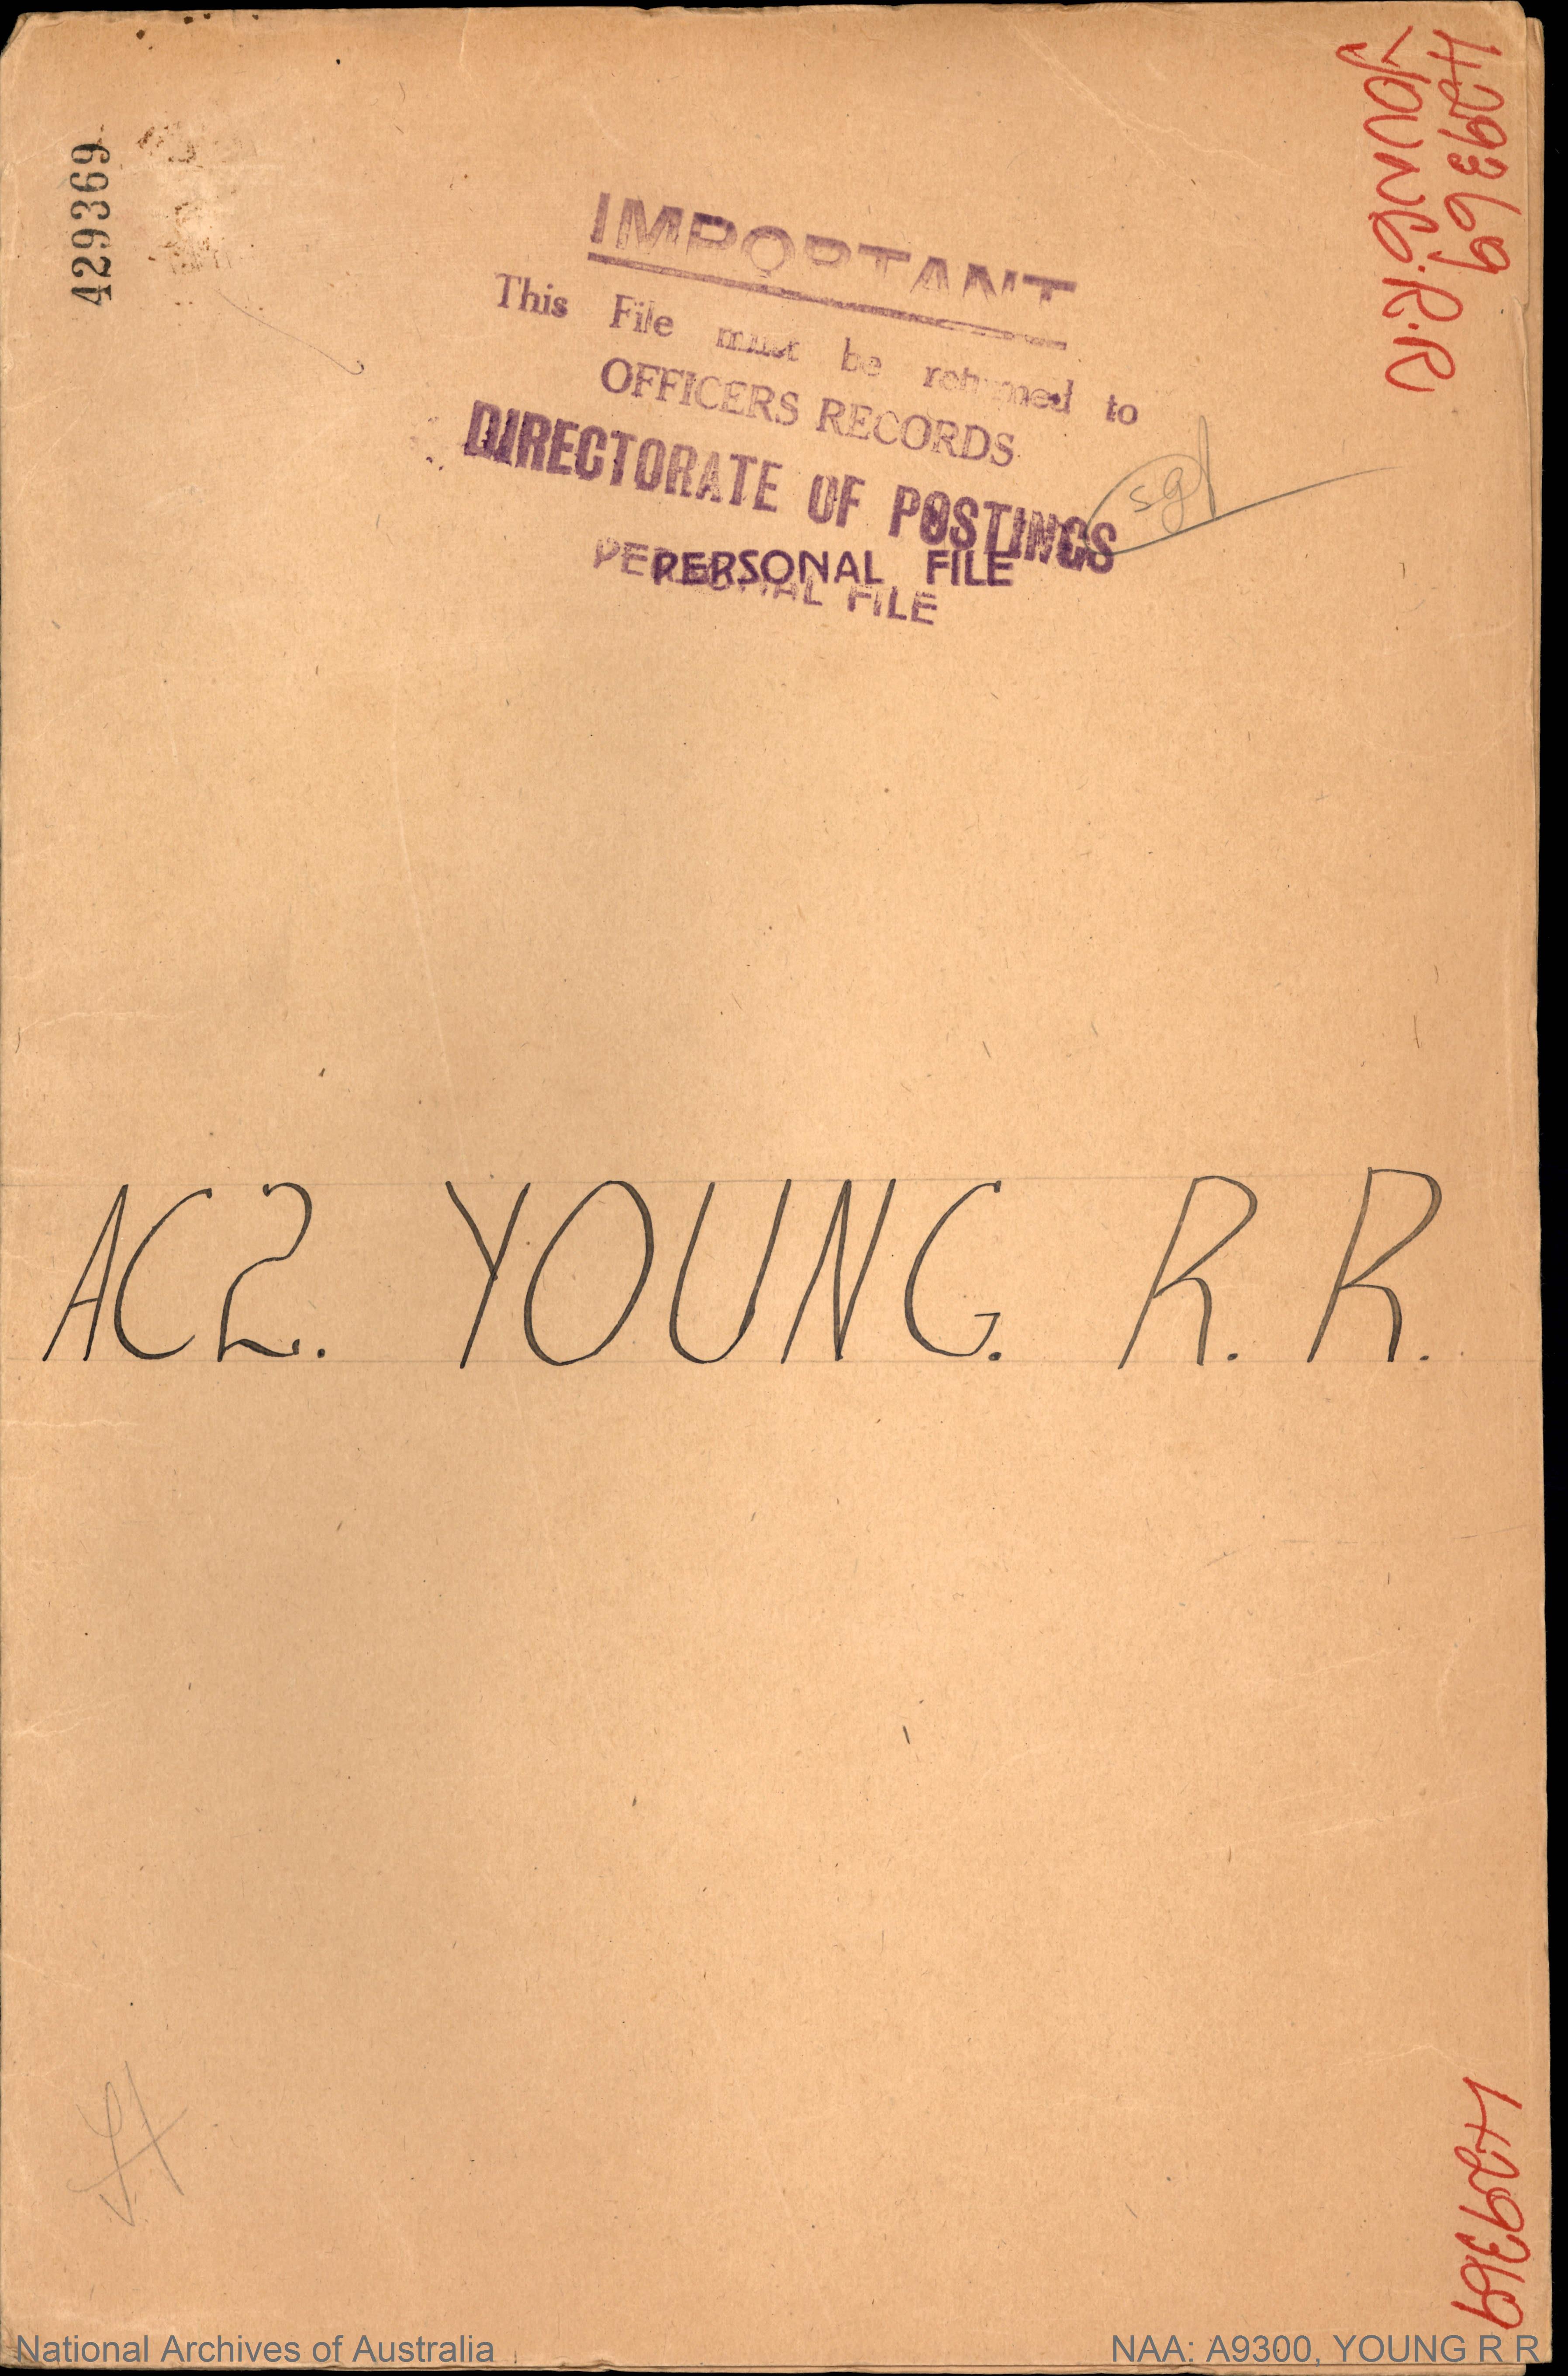 NAA: A9300, YOUNG R R